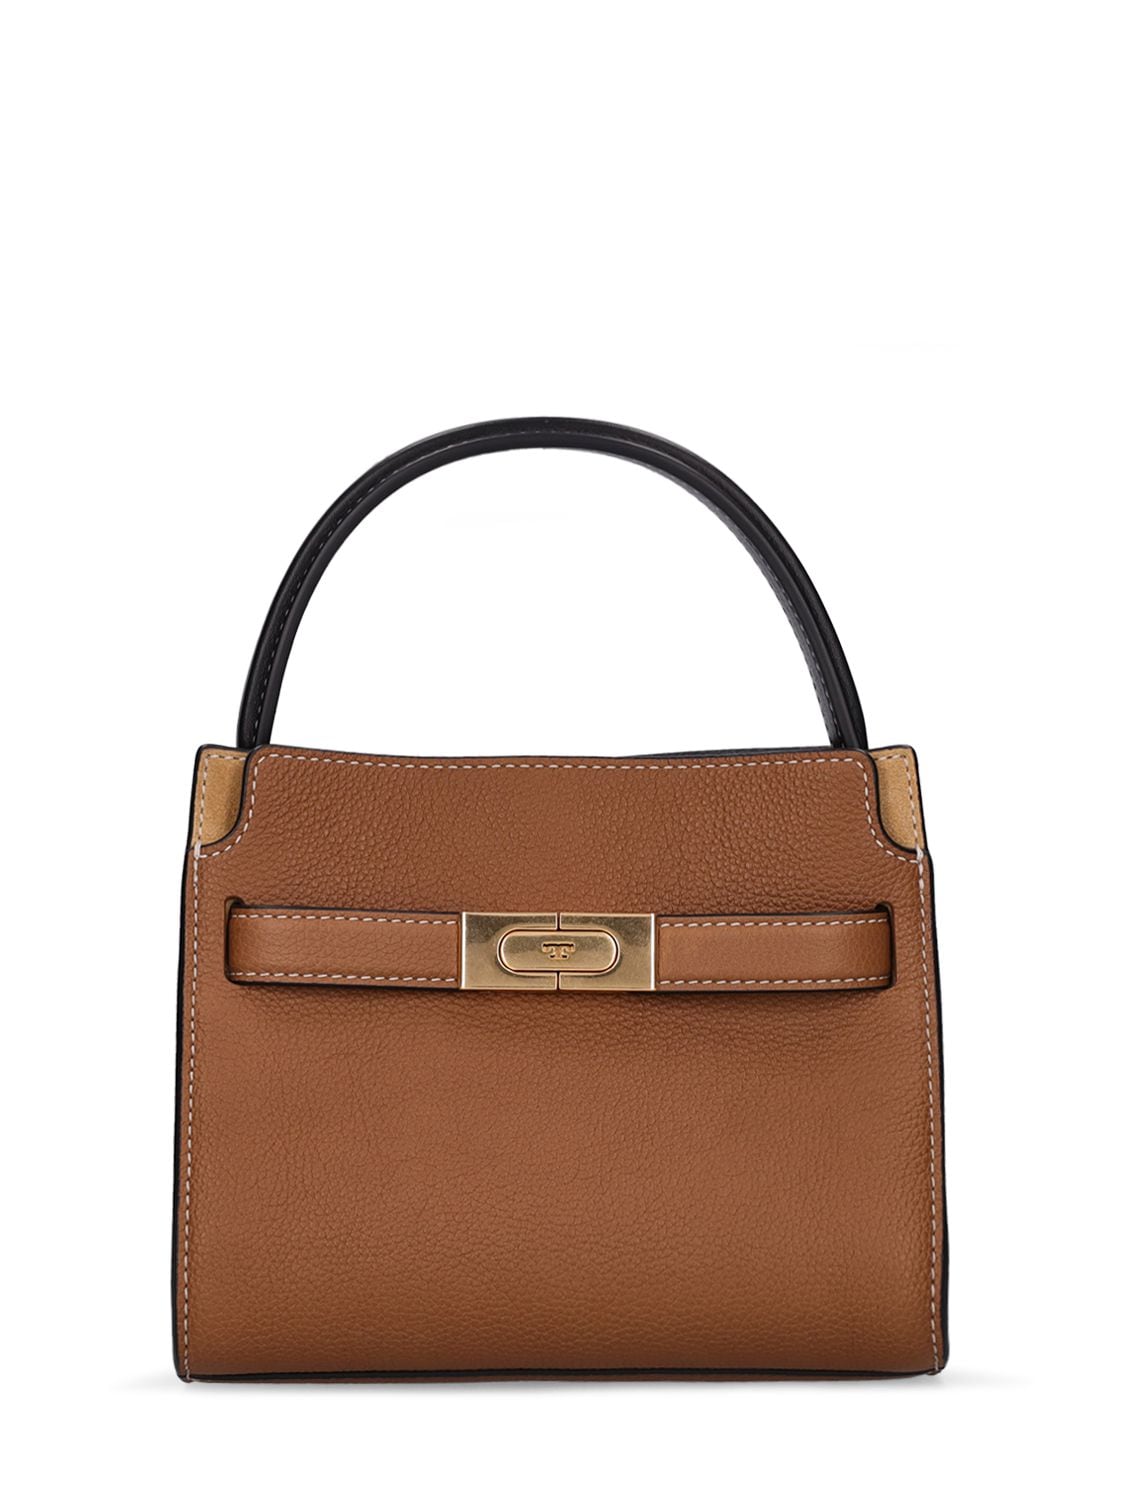 Tory Burch Petite Double Lee Radziwill Pebbled Bag In Tiger's Eye